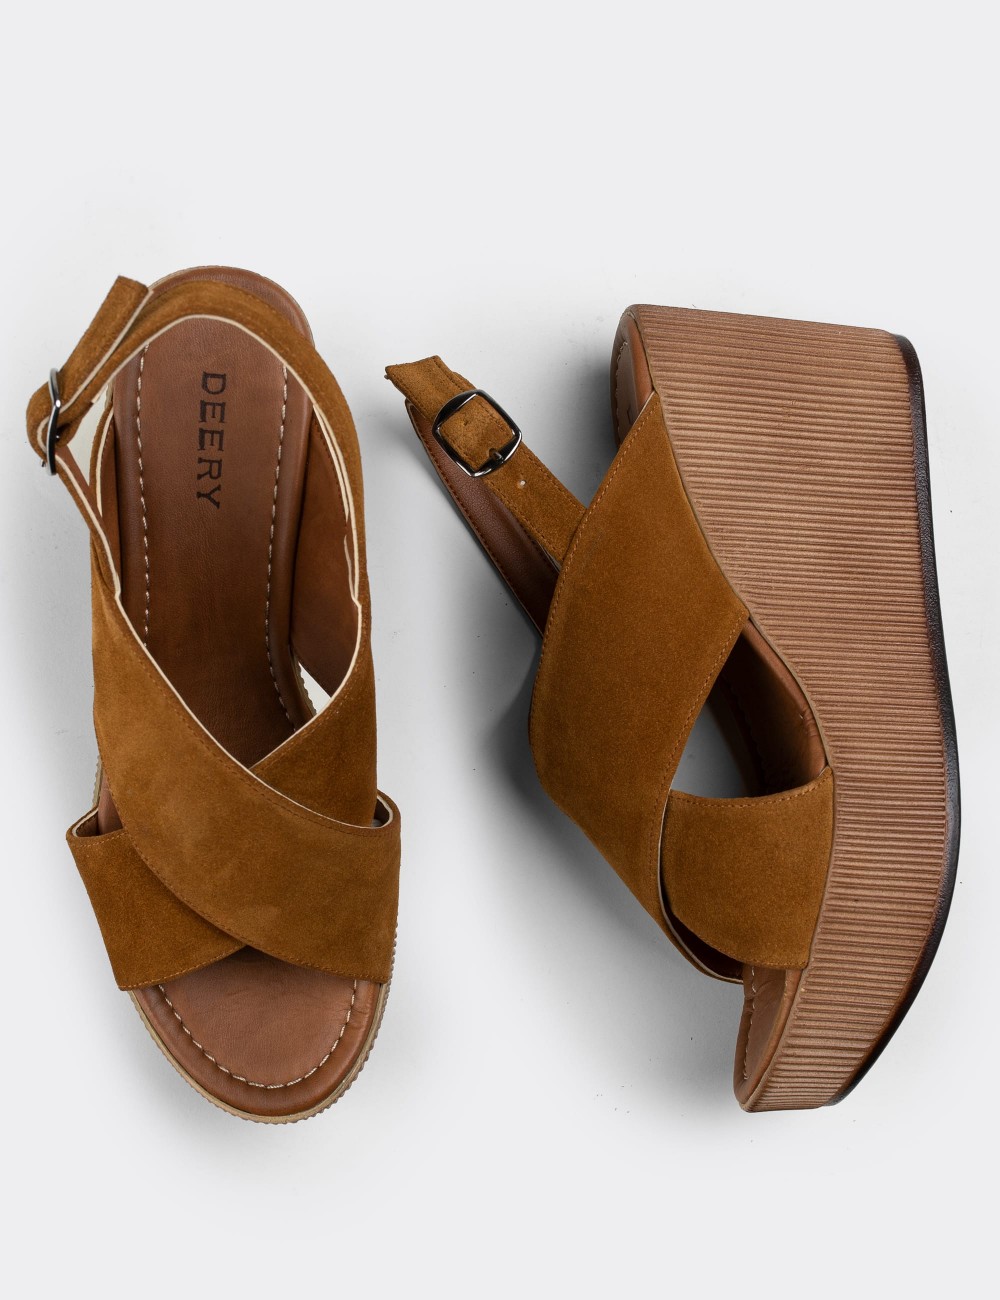 Tan Suede Leather Sandals - E6174ZTBAC01